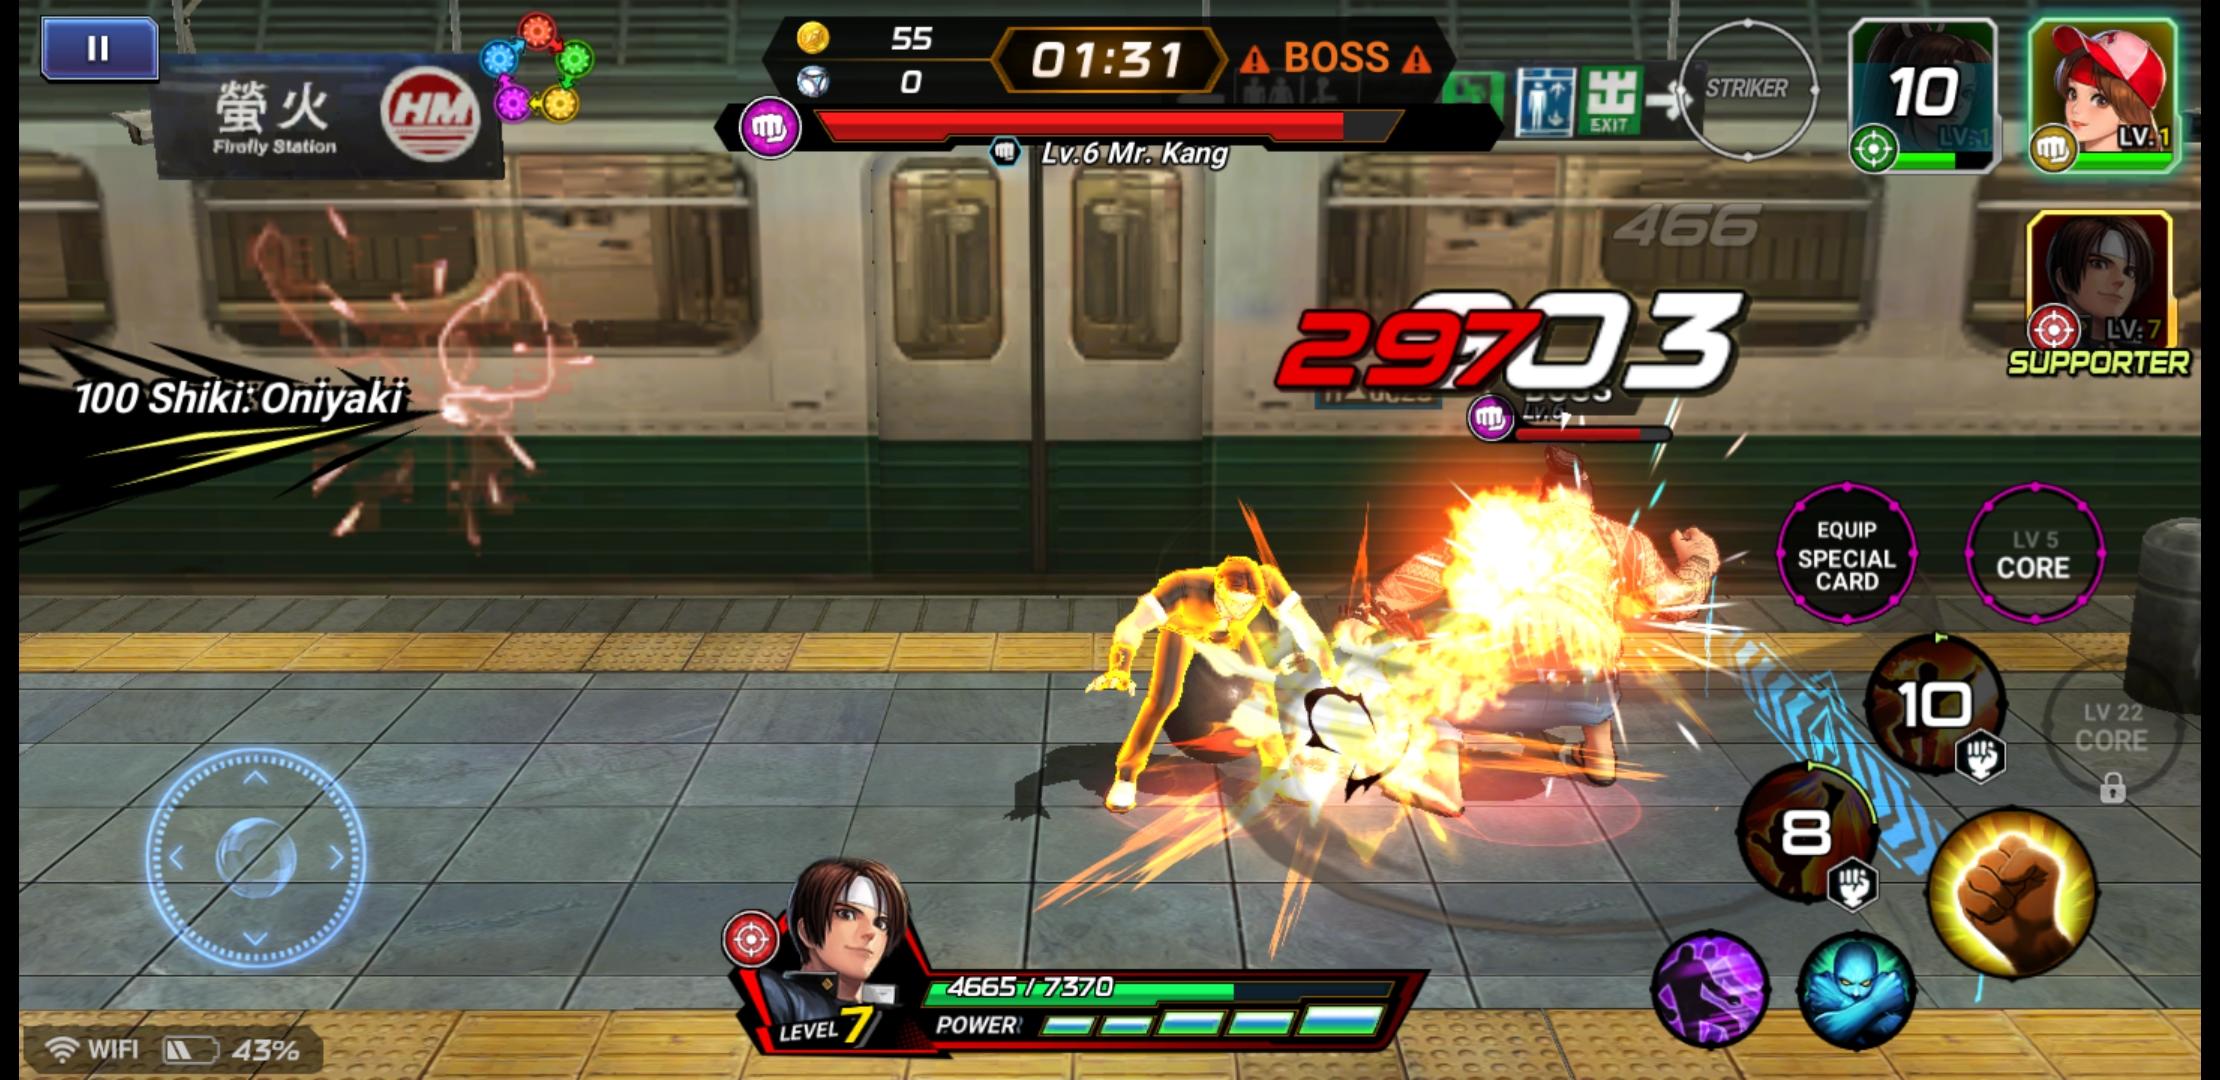 The King of Fighters ALLSTAR on PC: Beat Up The Competition With